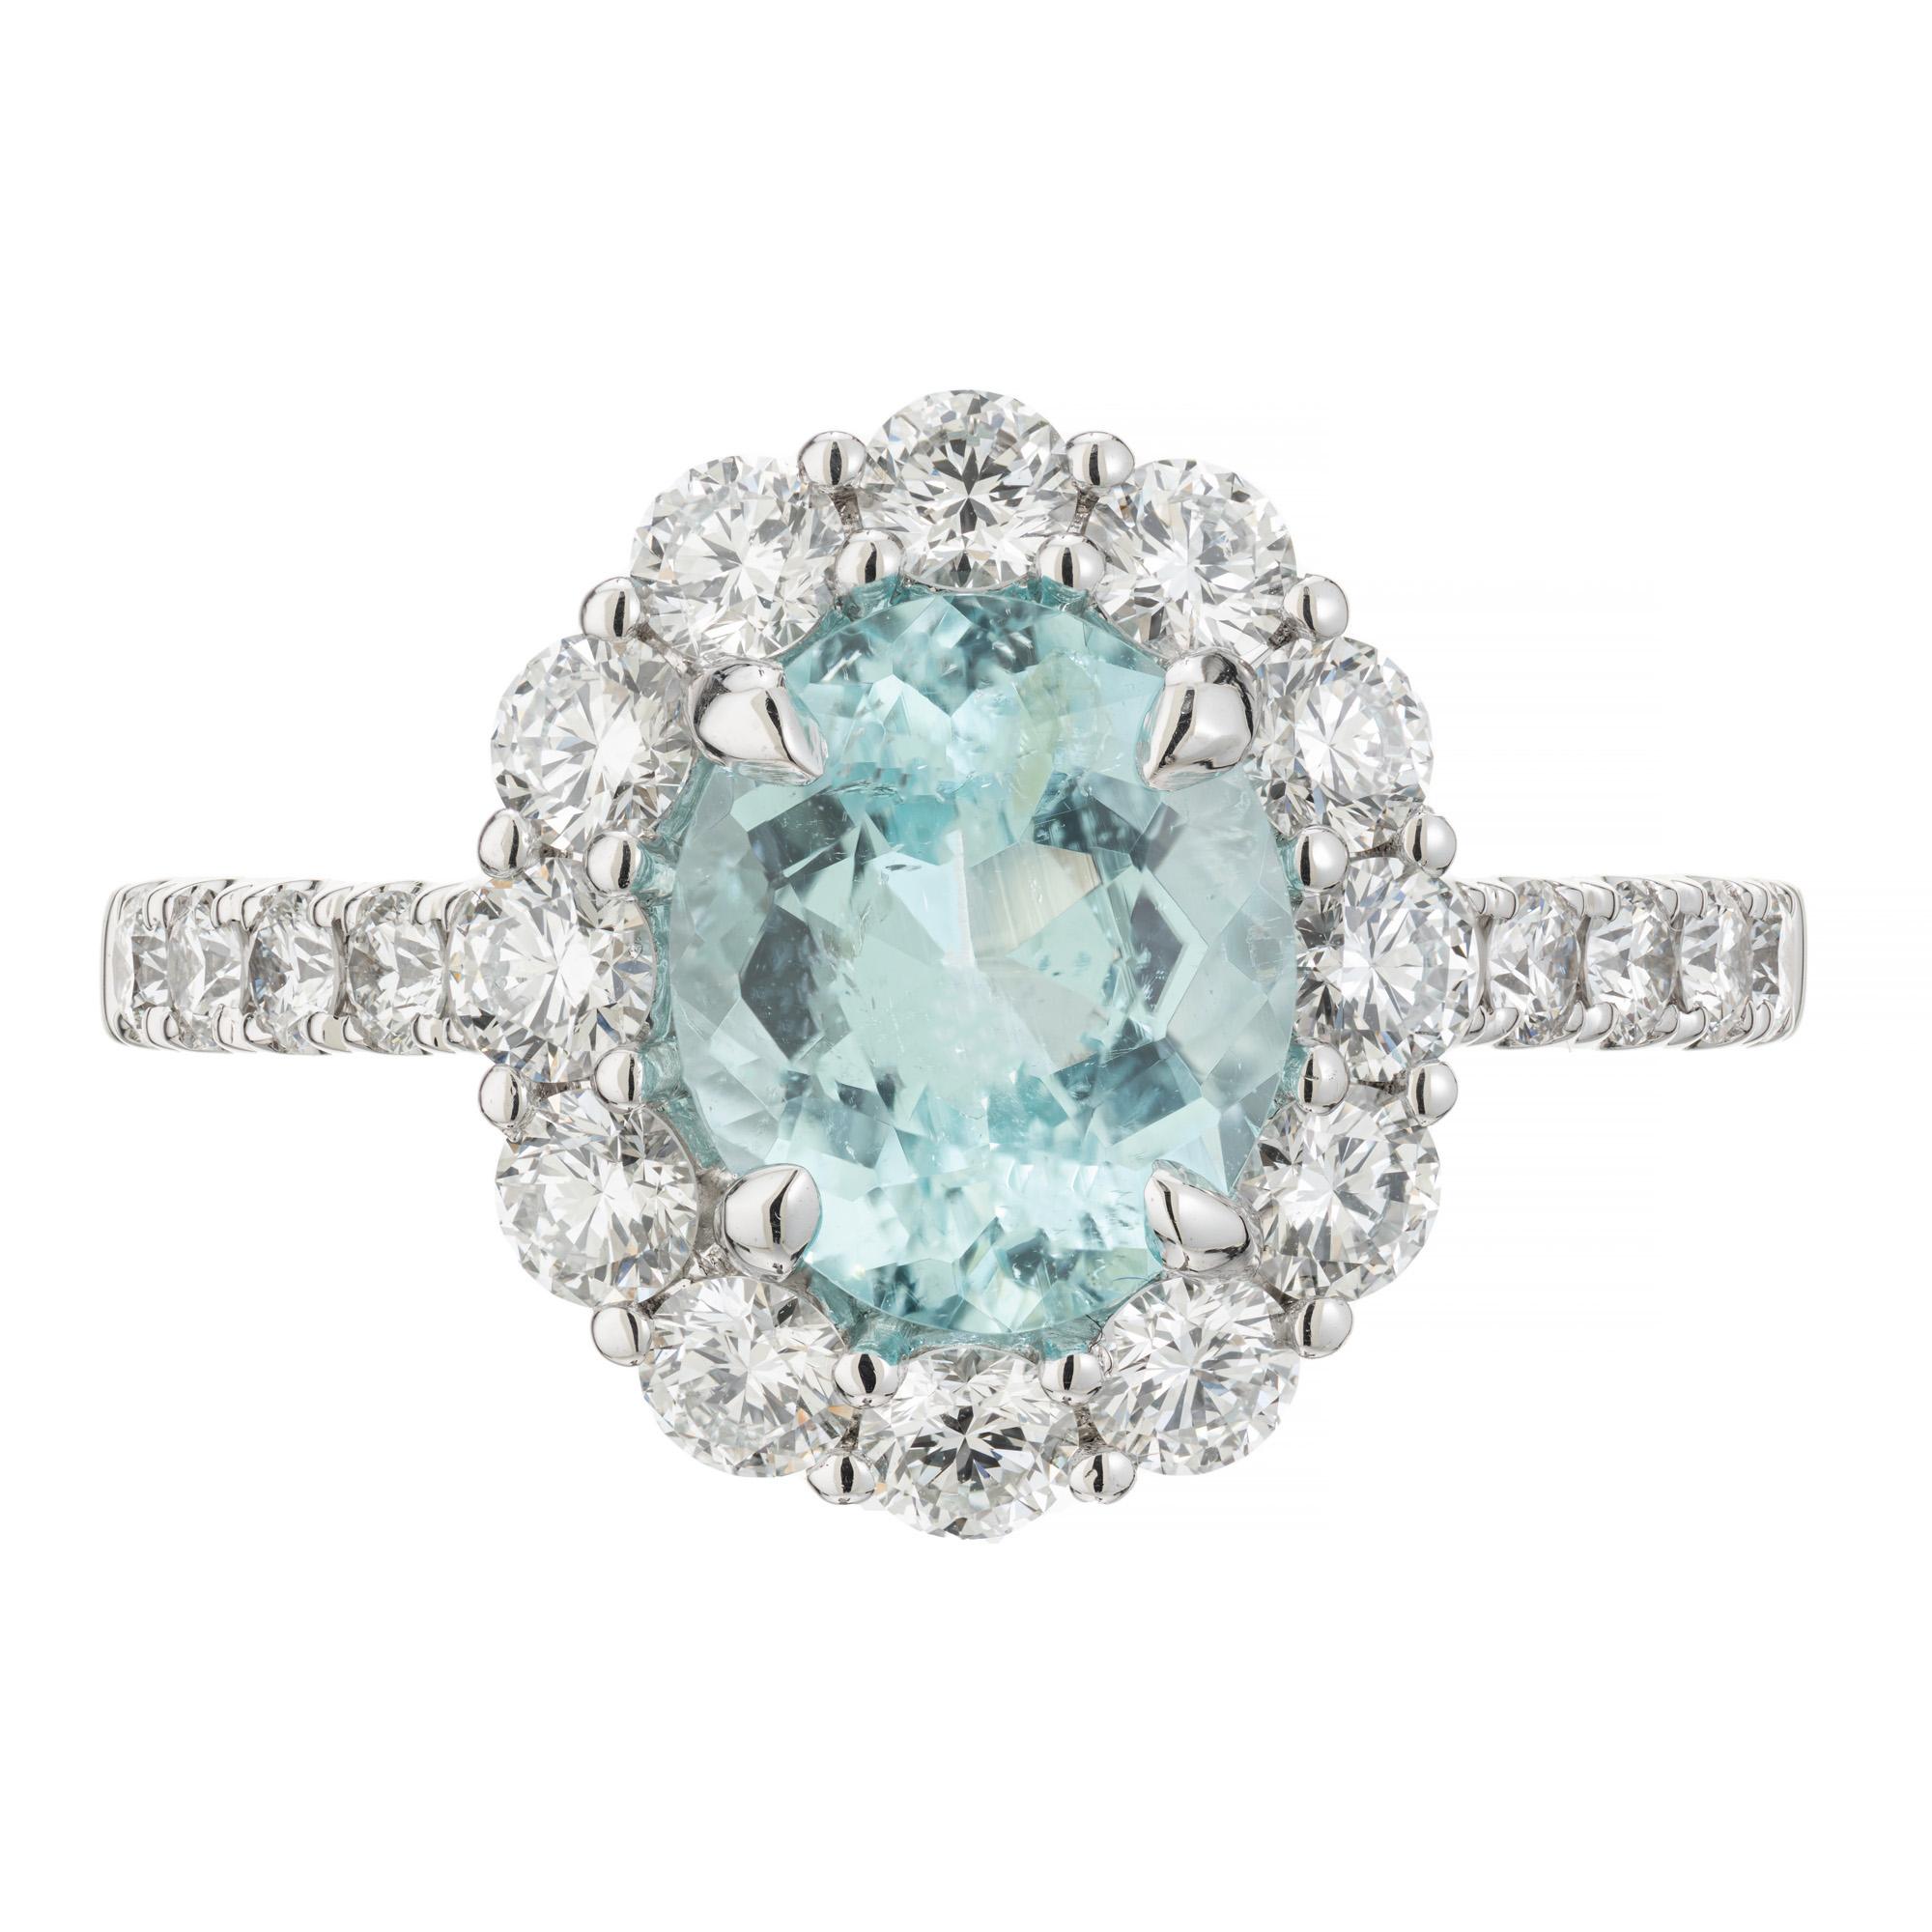 Beautiful, bright soft neon blue tourmaline and diamond engagement ring. GIA certified 1.99 carat oval Paraiba Tourmaline center stone. Mounted in a platinum setting with a halo of round brilliant cut diamonds accented with diamonds along both